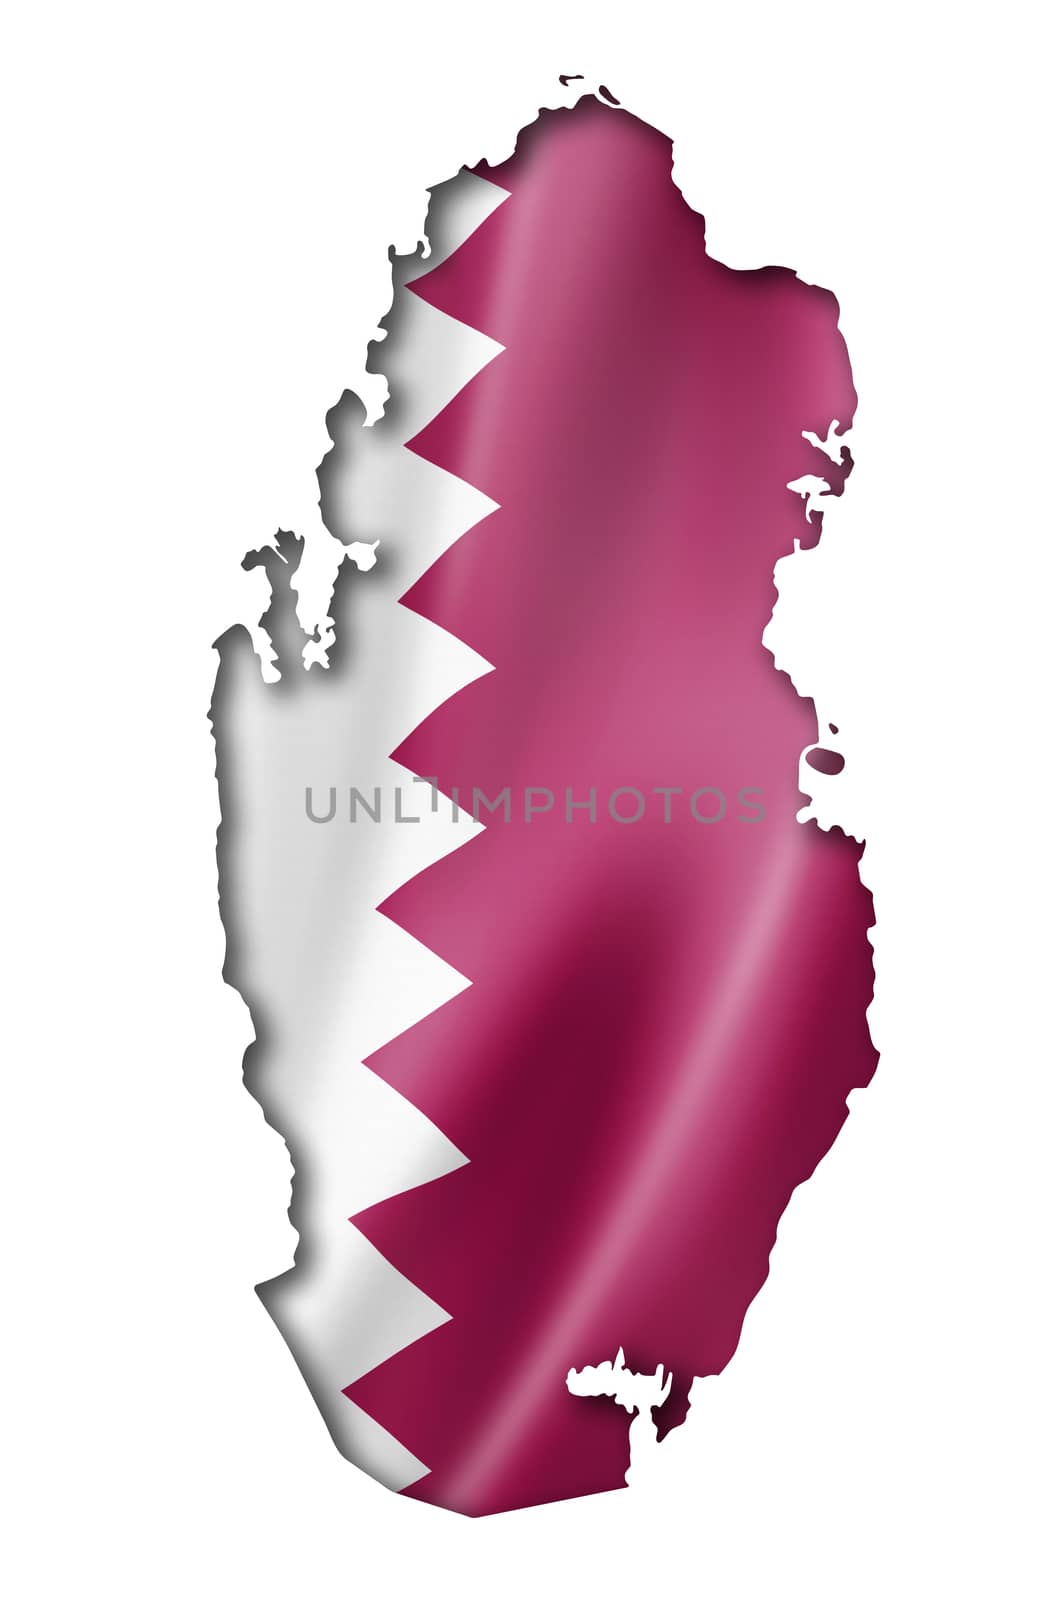 Qatar flag map, three dimensional render, isolated on white